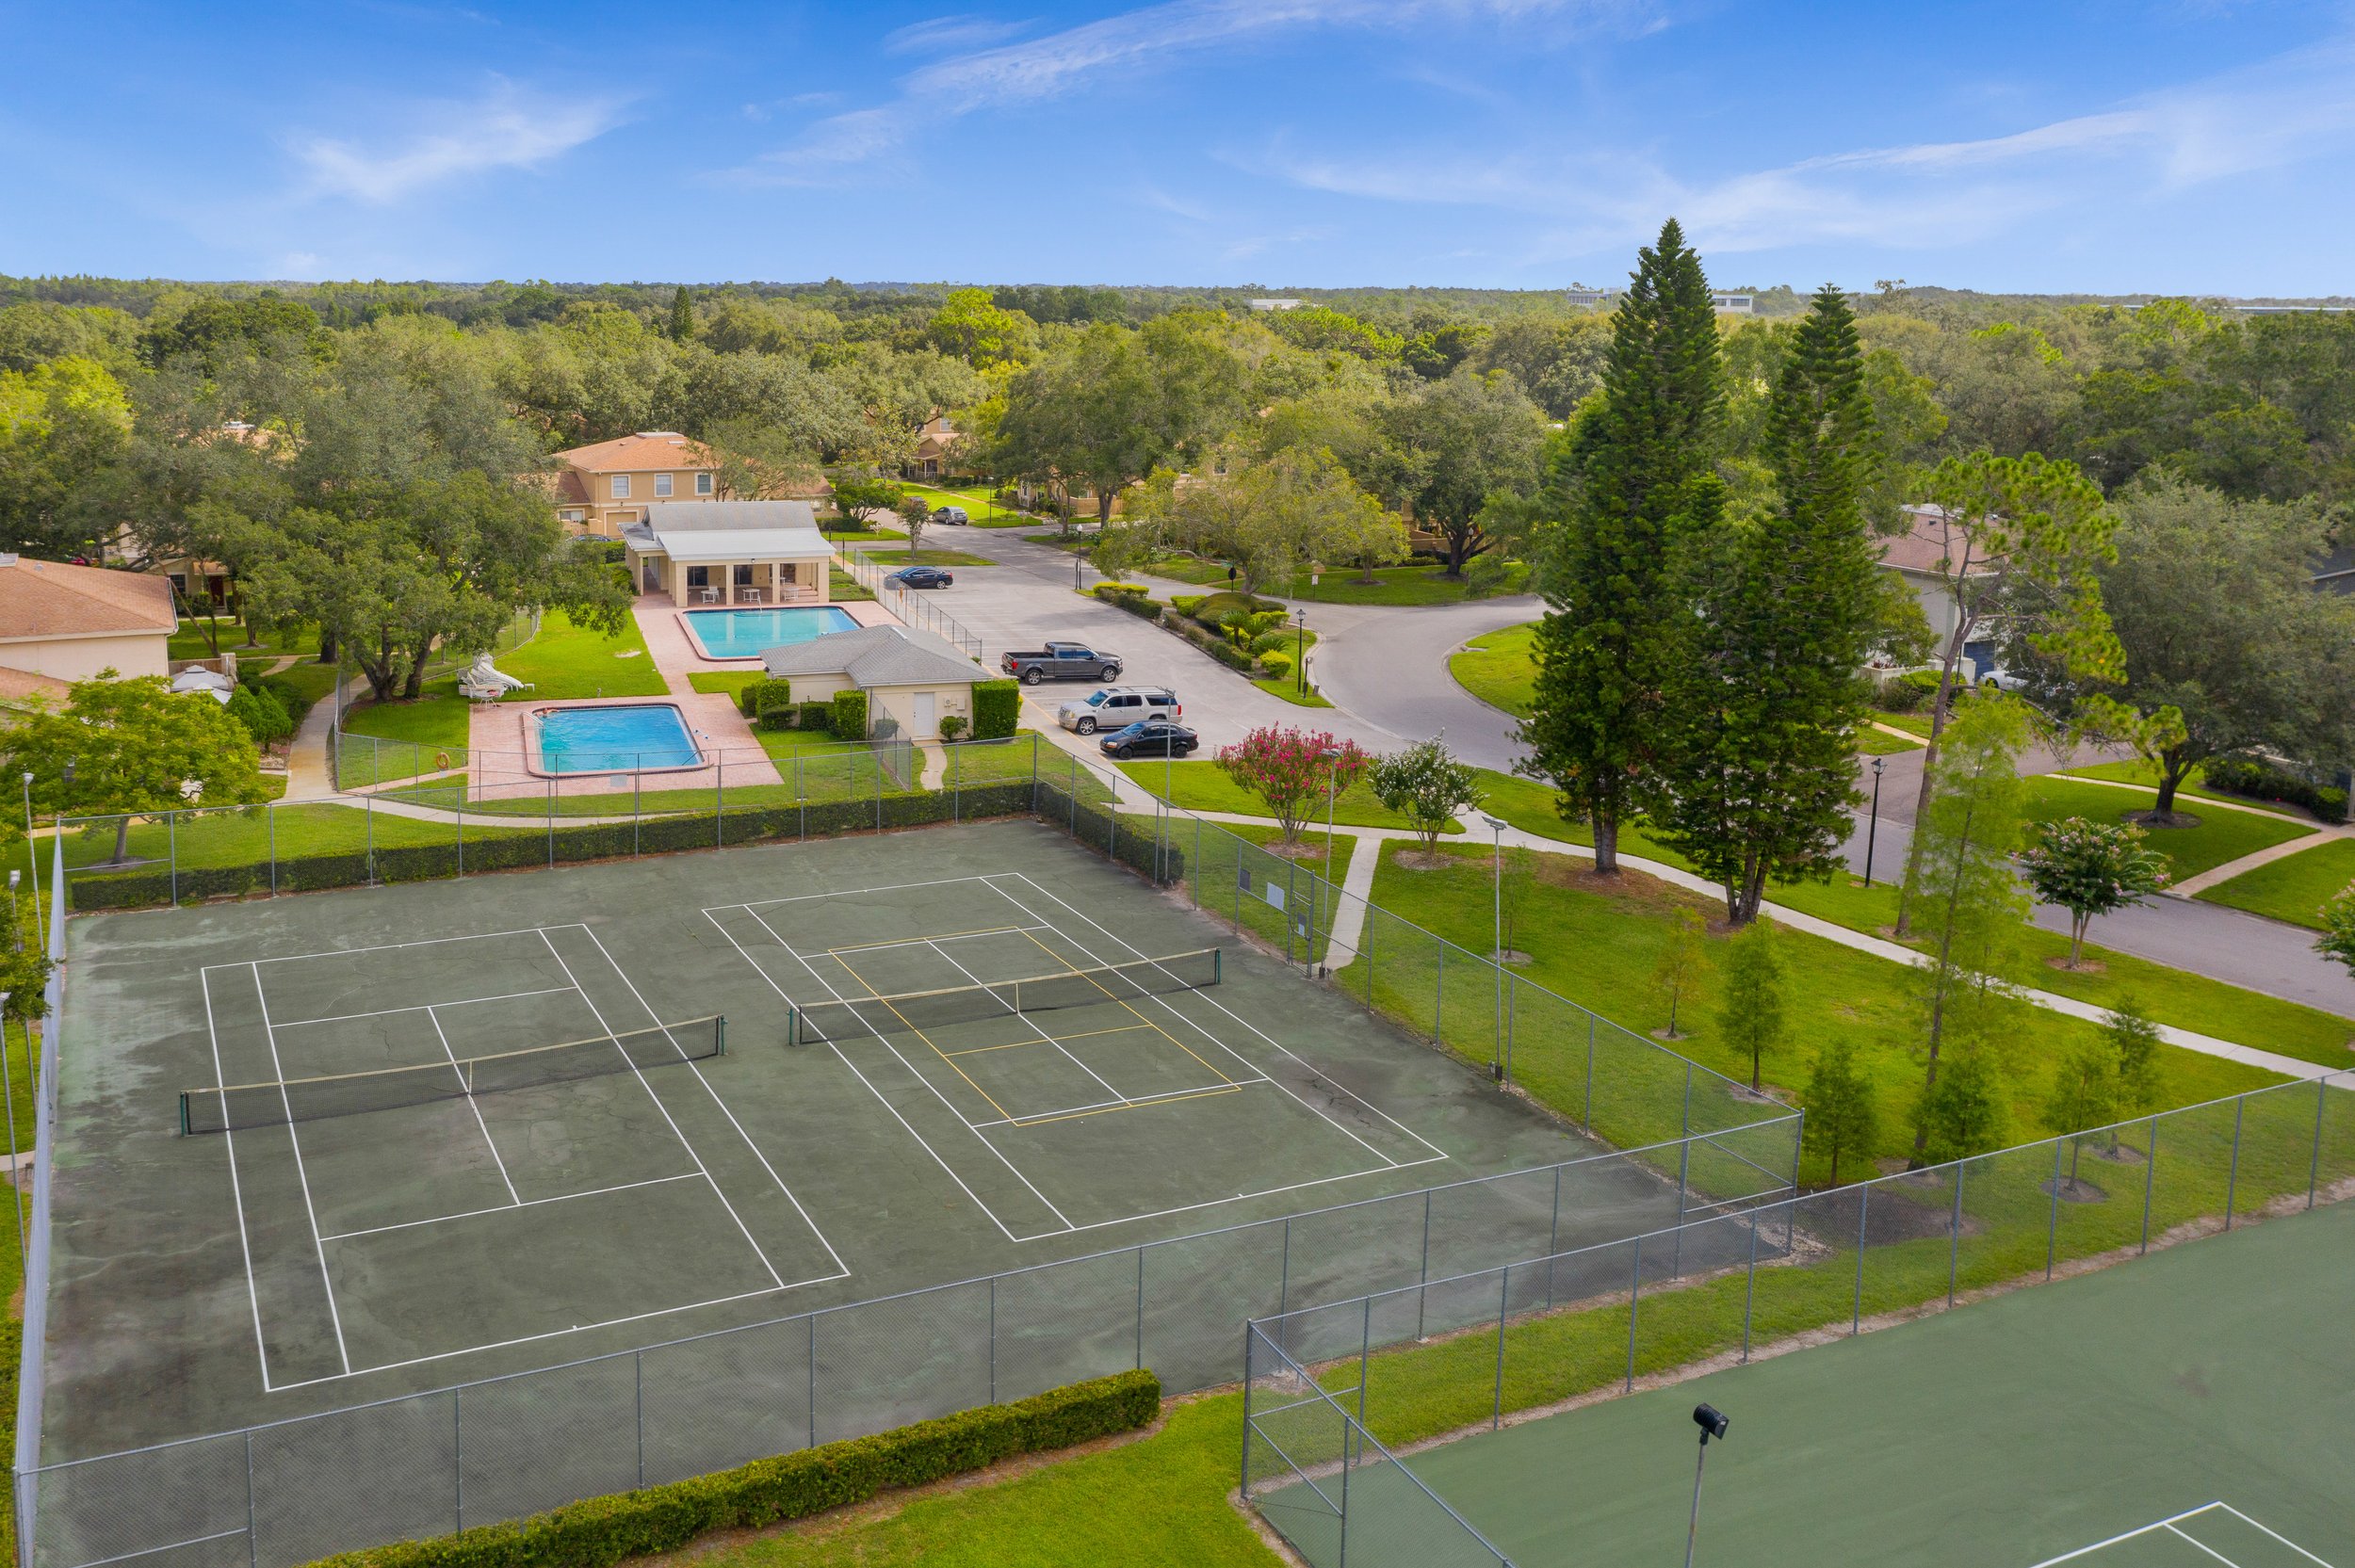 Pool and Tennis Courts.JPG